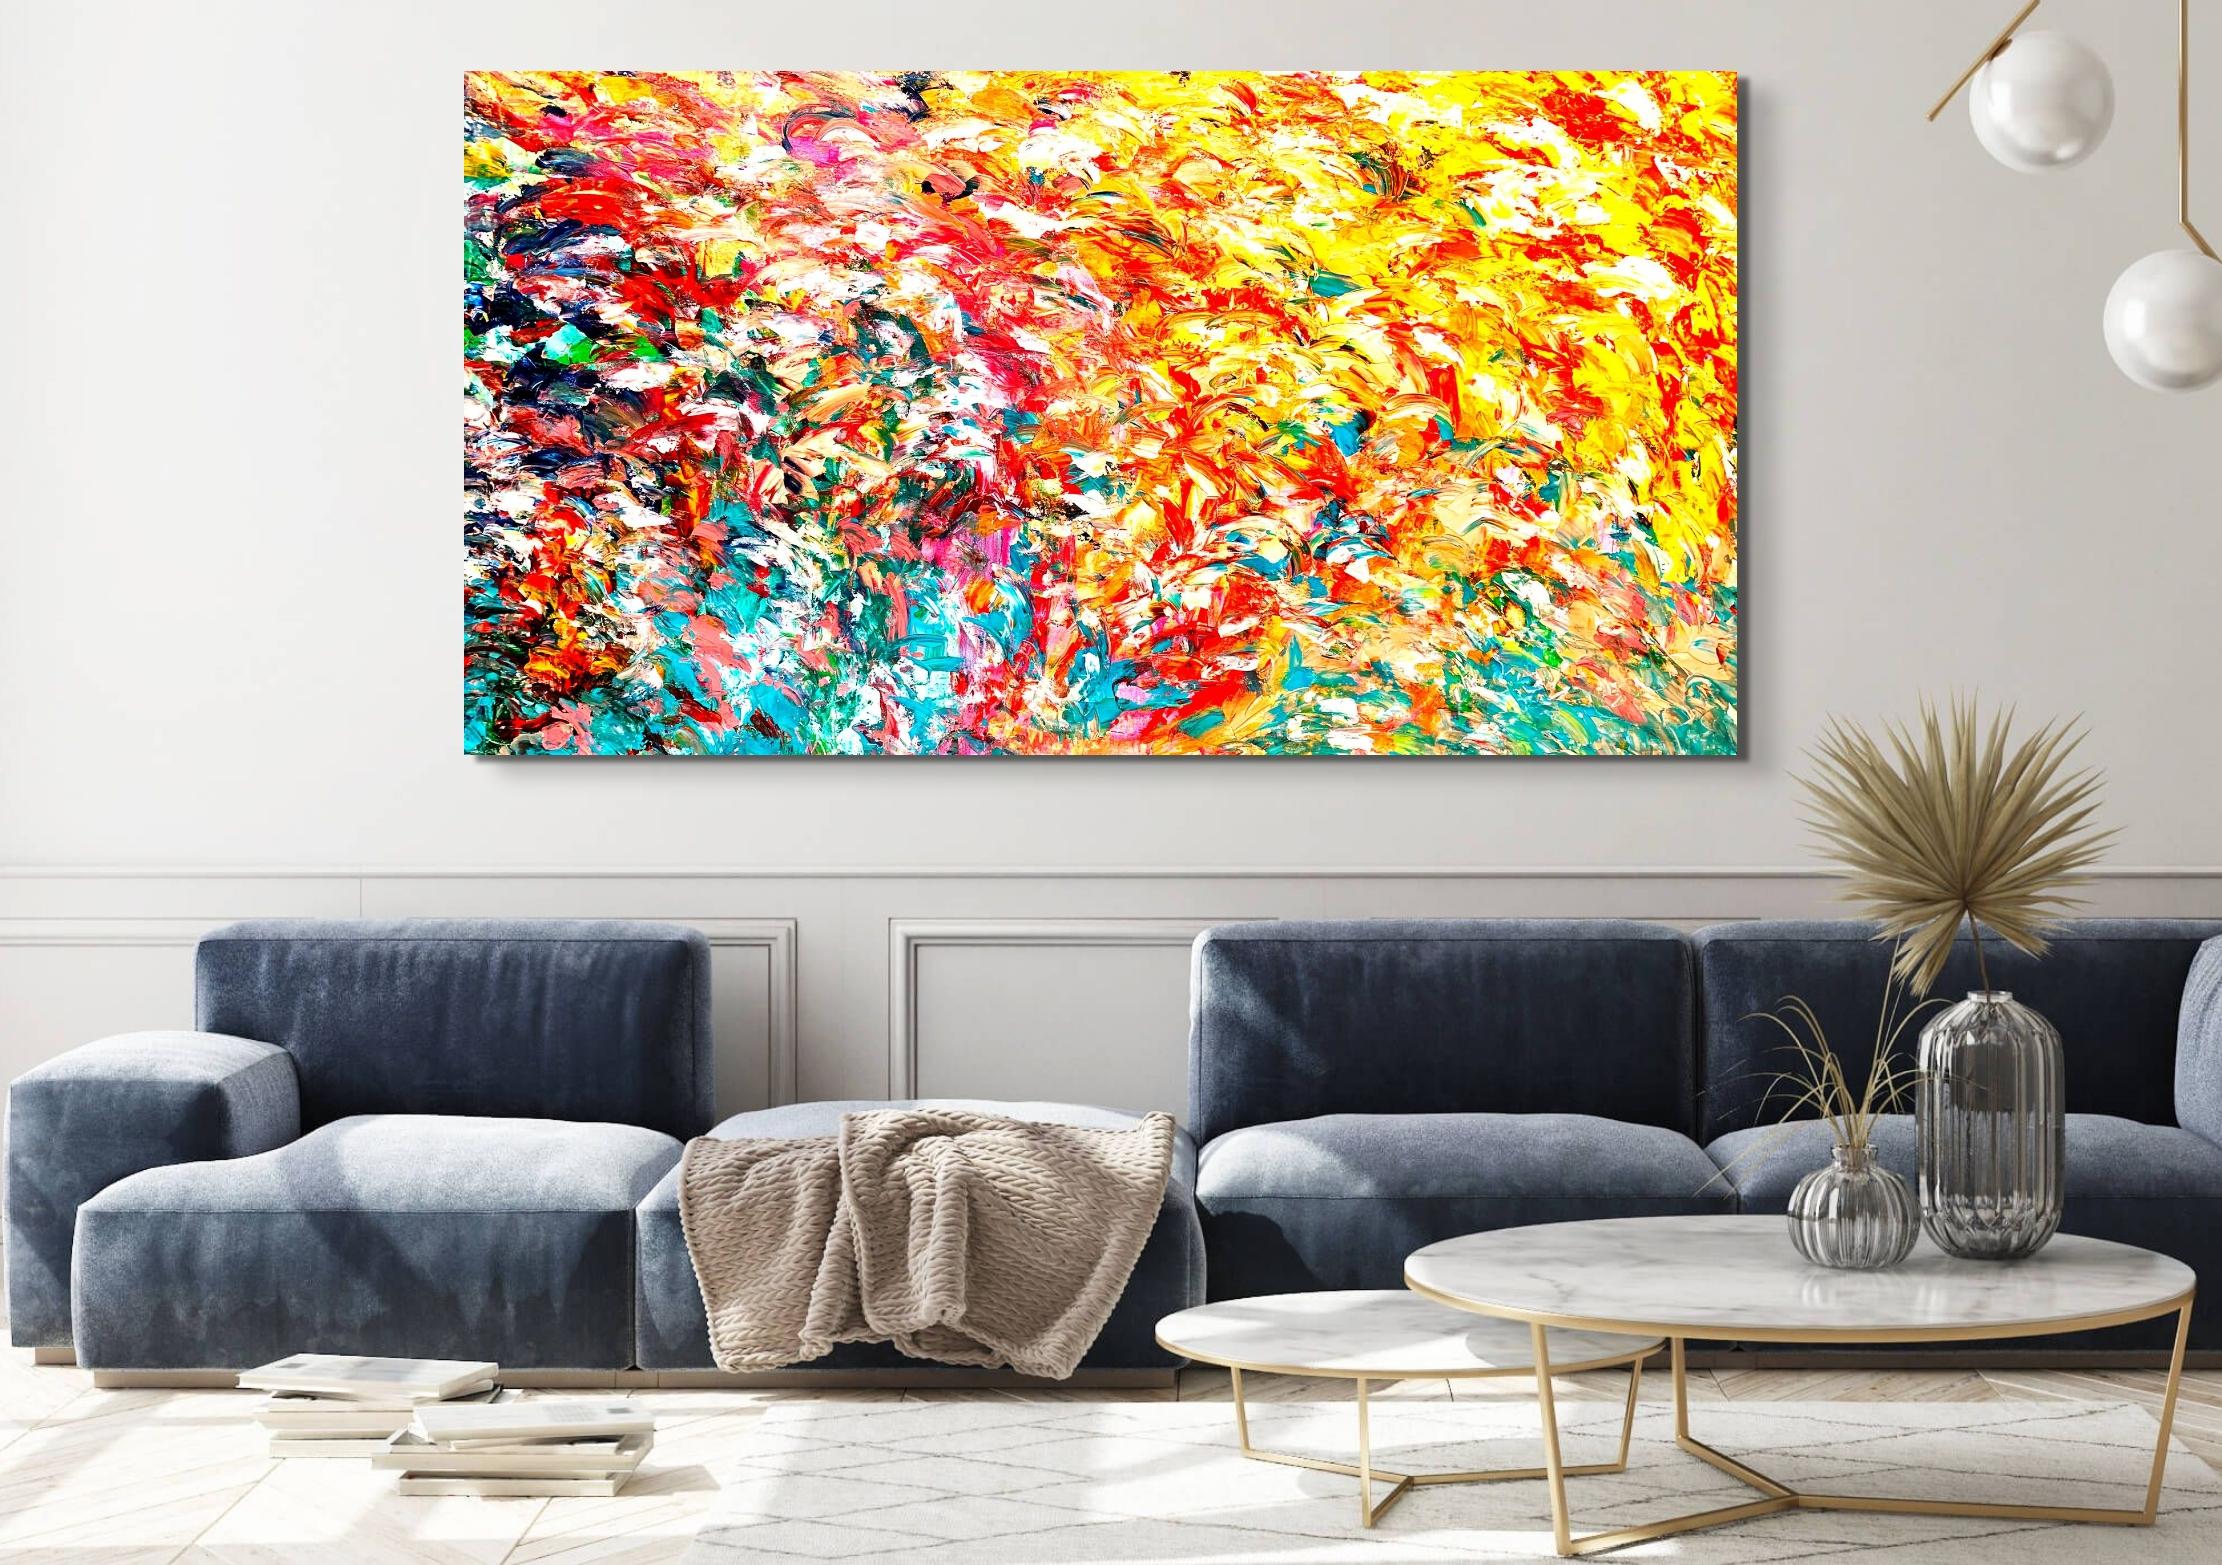 Transitional Interplay - Abstract Expressionist Painting by Estelle Asmodelle